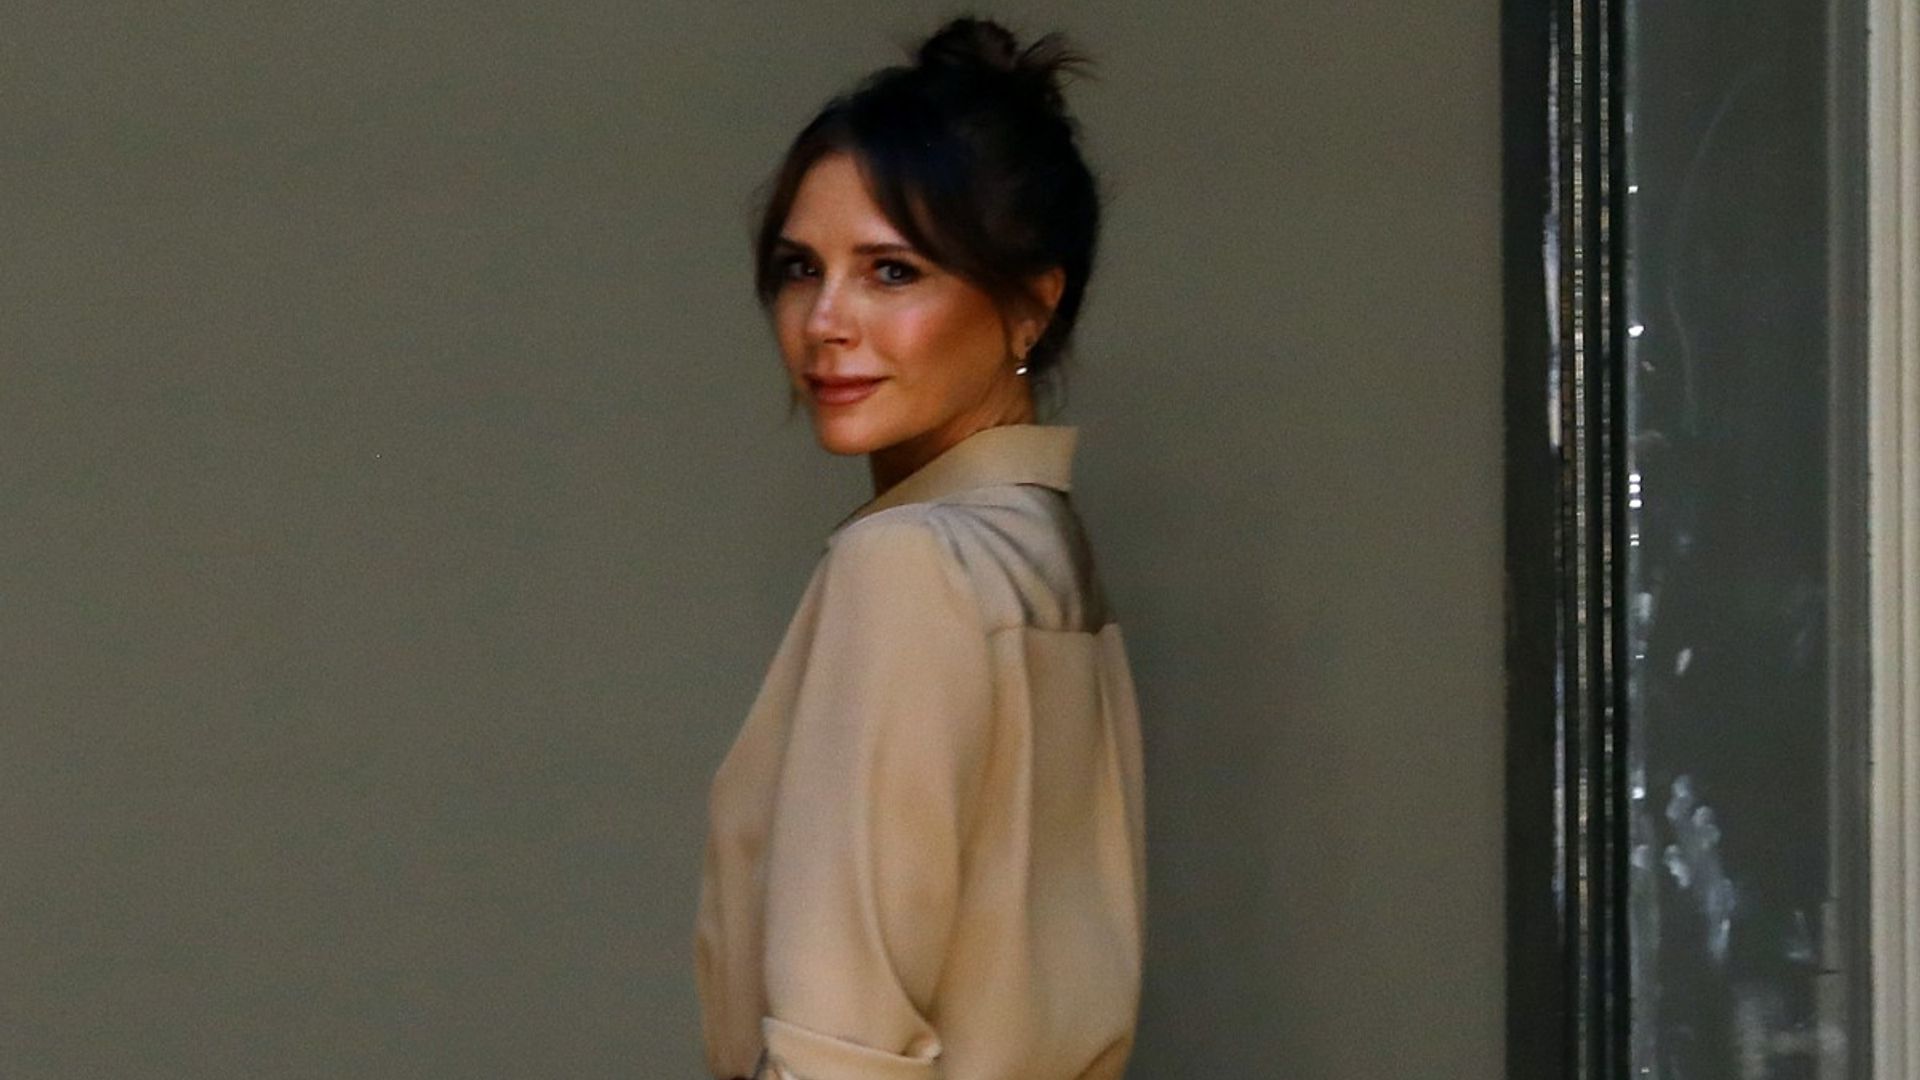 Victoria Beckham posts rare candid photo trying out face masks – and you won't recognise her